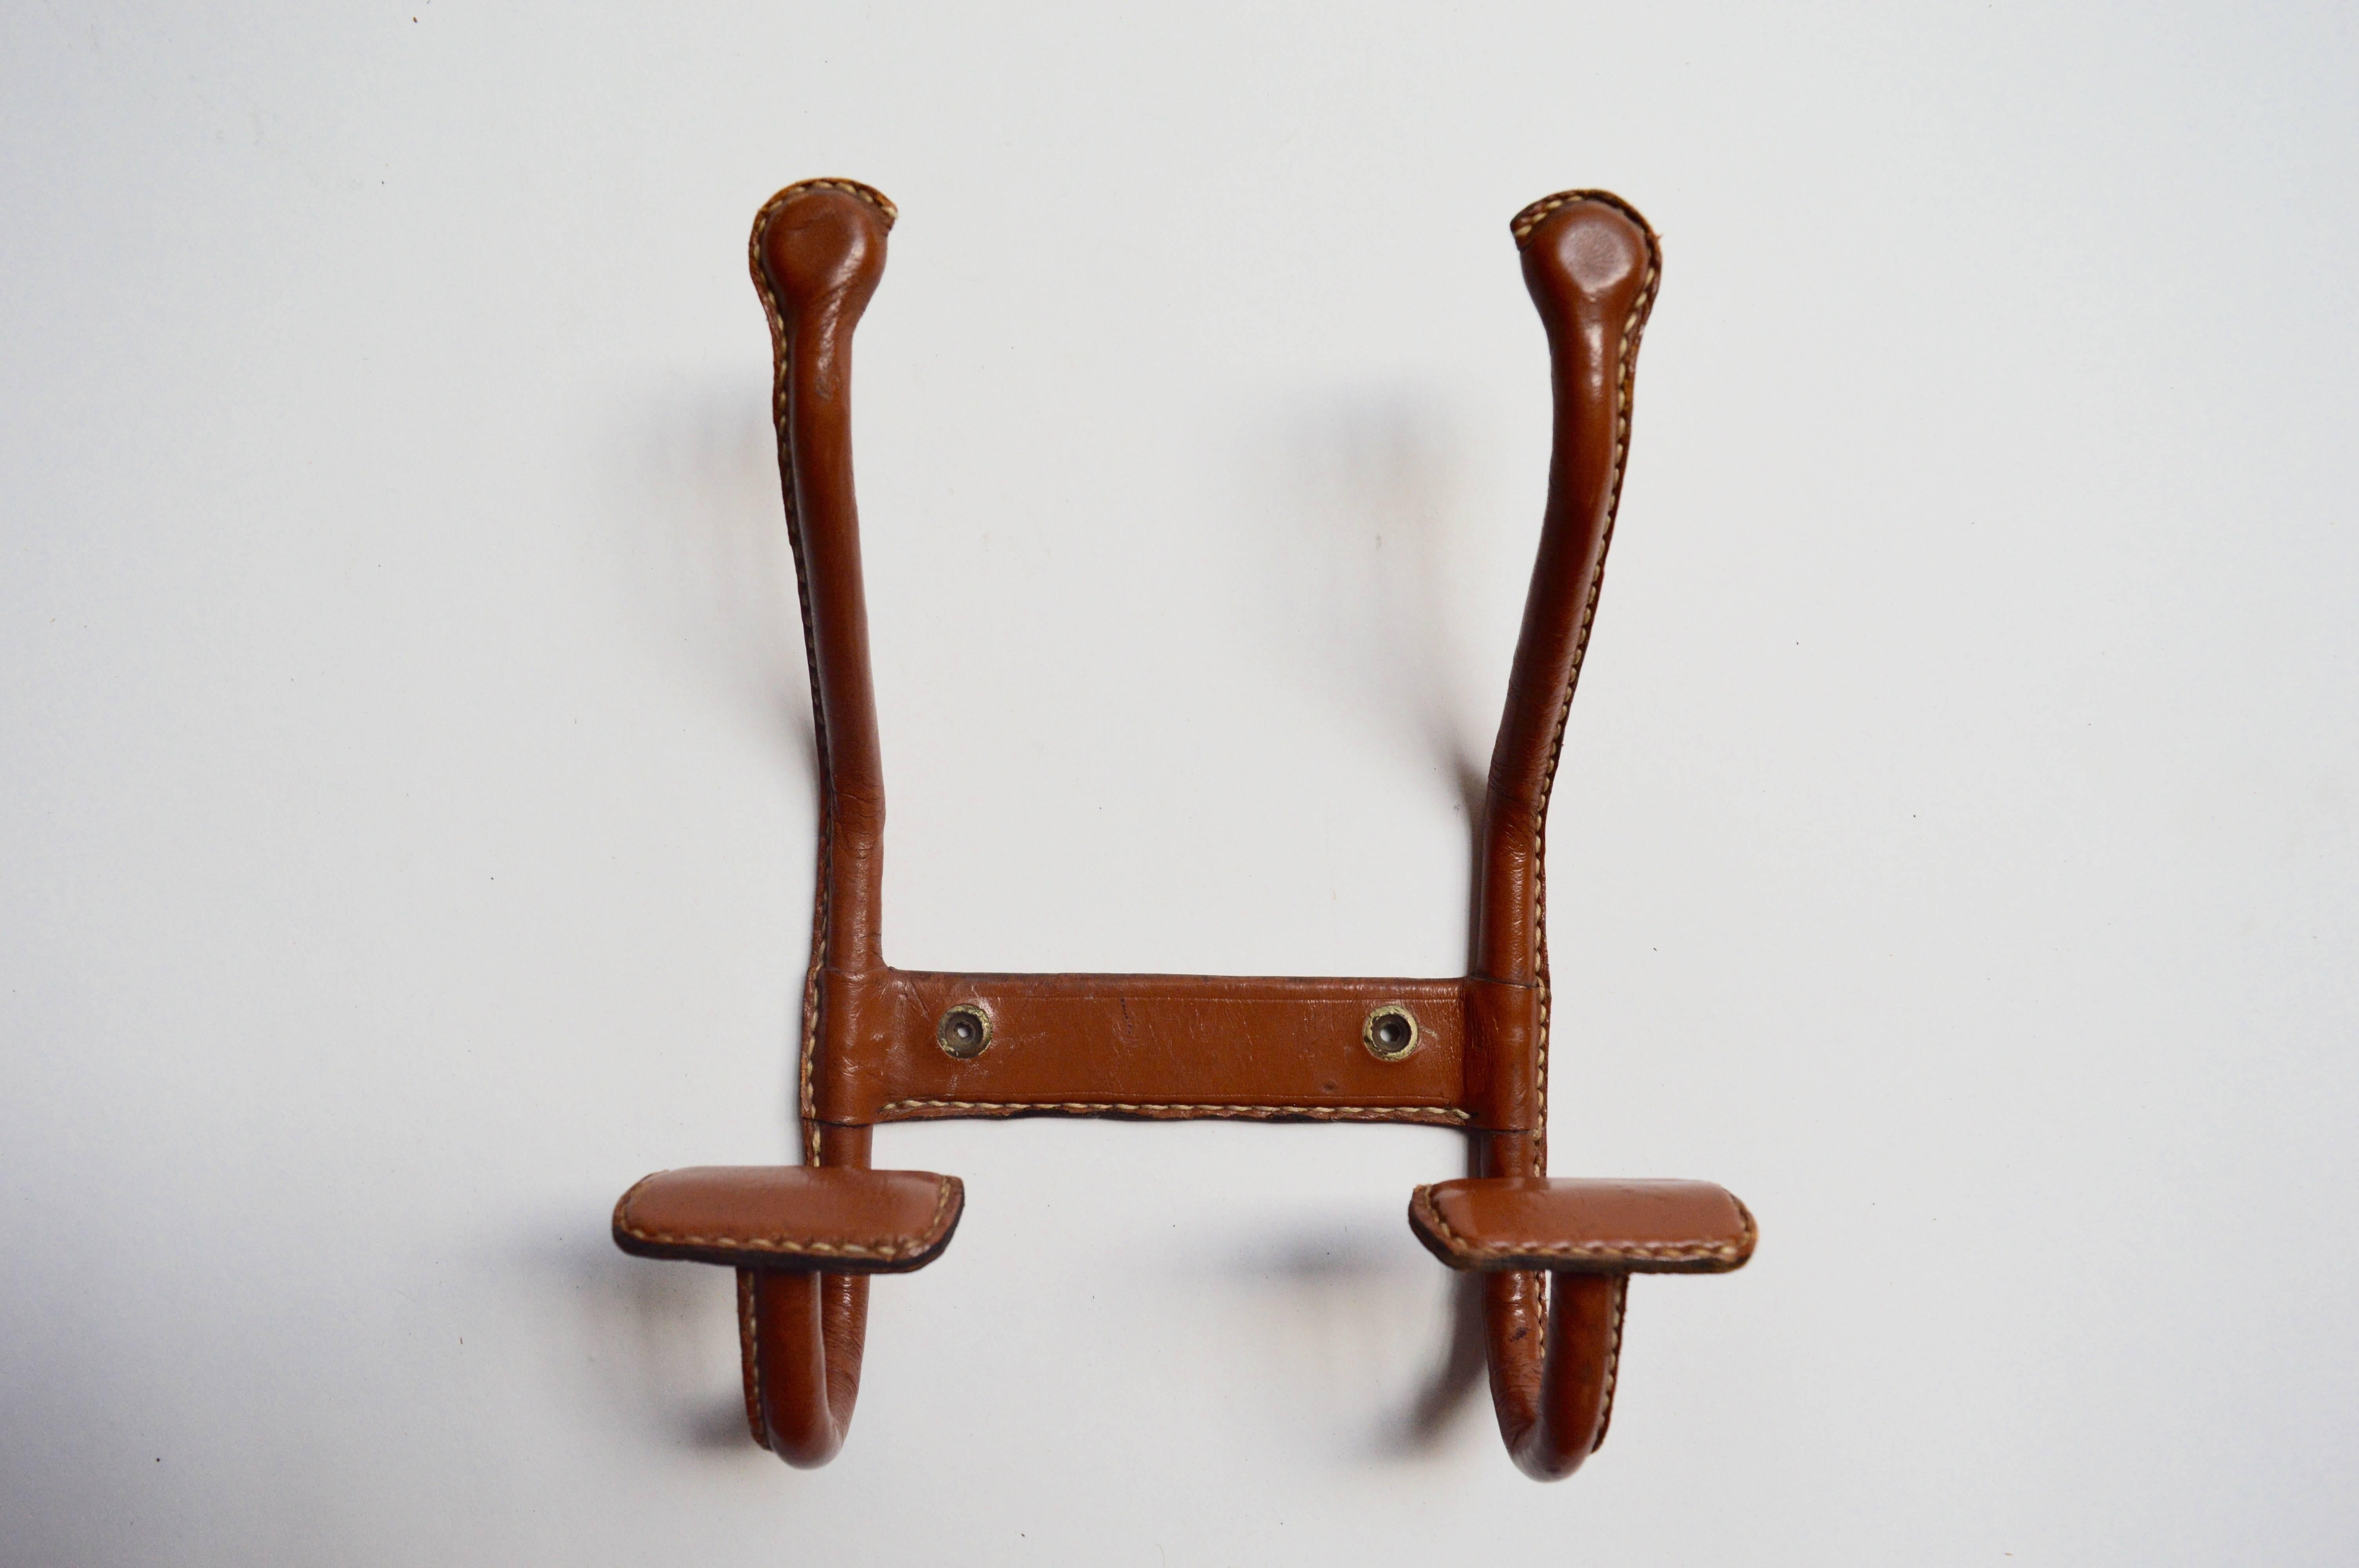 Handsome coat hook by French designer Jacques Adnet. Saddle leather has beautiful patina and is in excellent vintage condition. Signature contrast stitching throughout. Hook is in the figure of an 